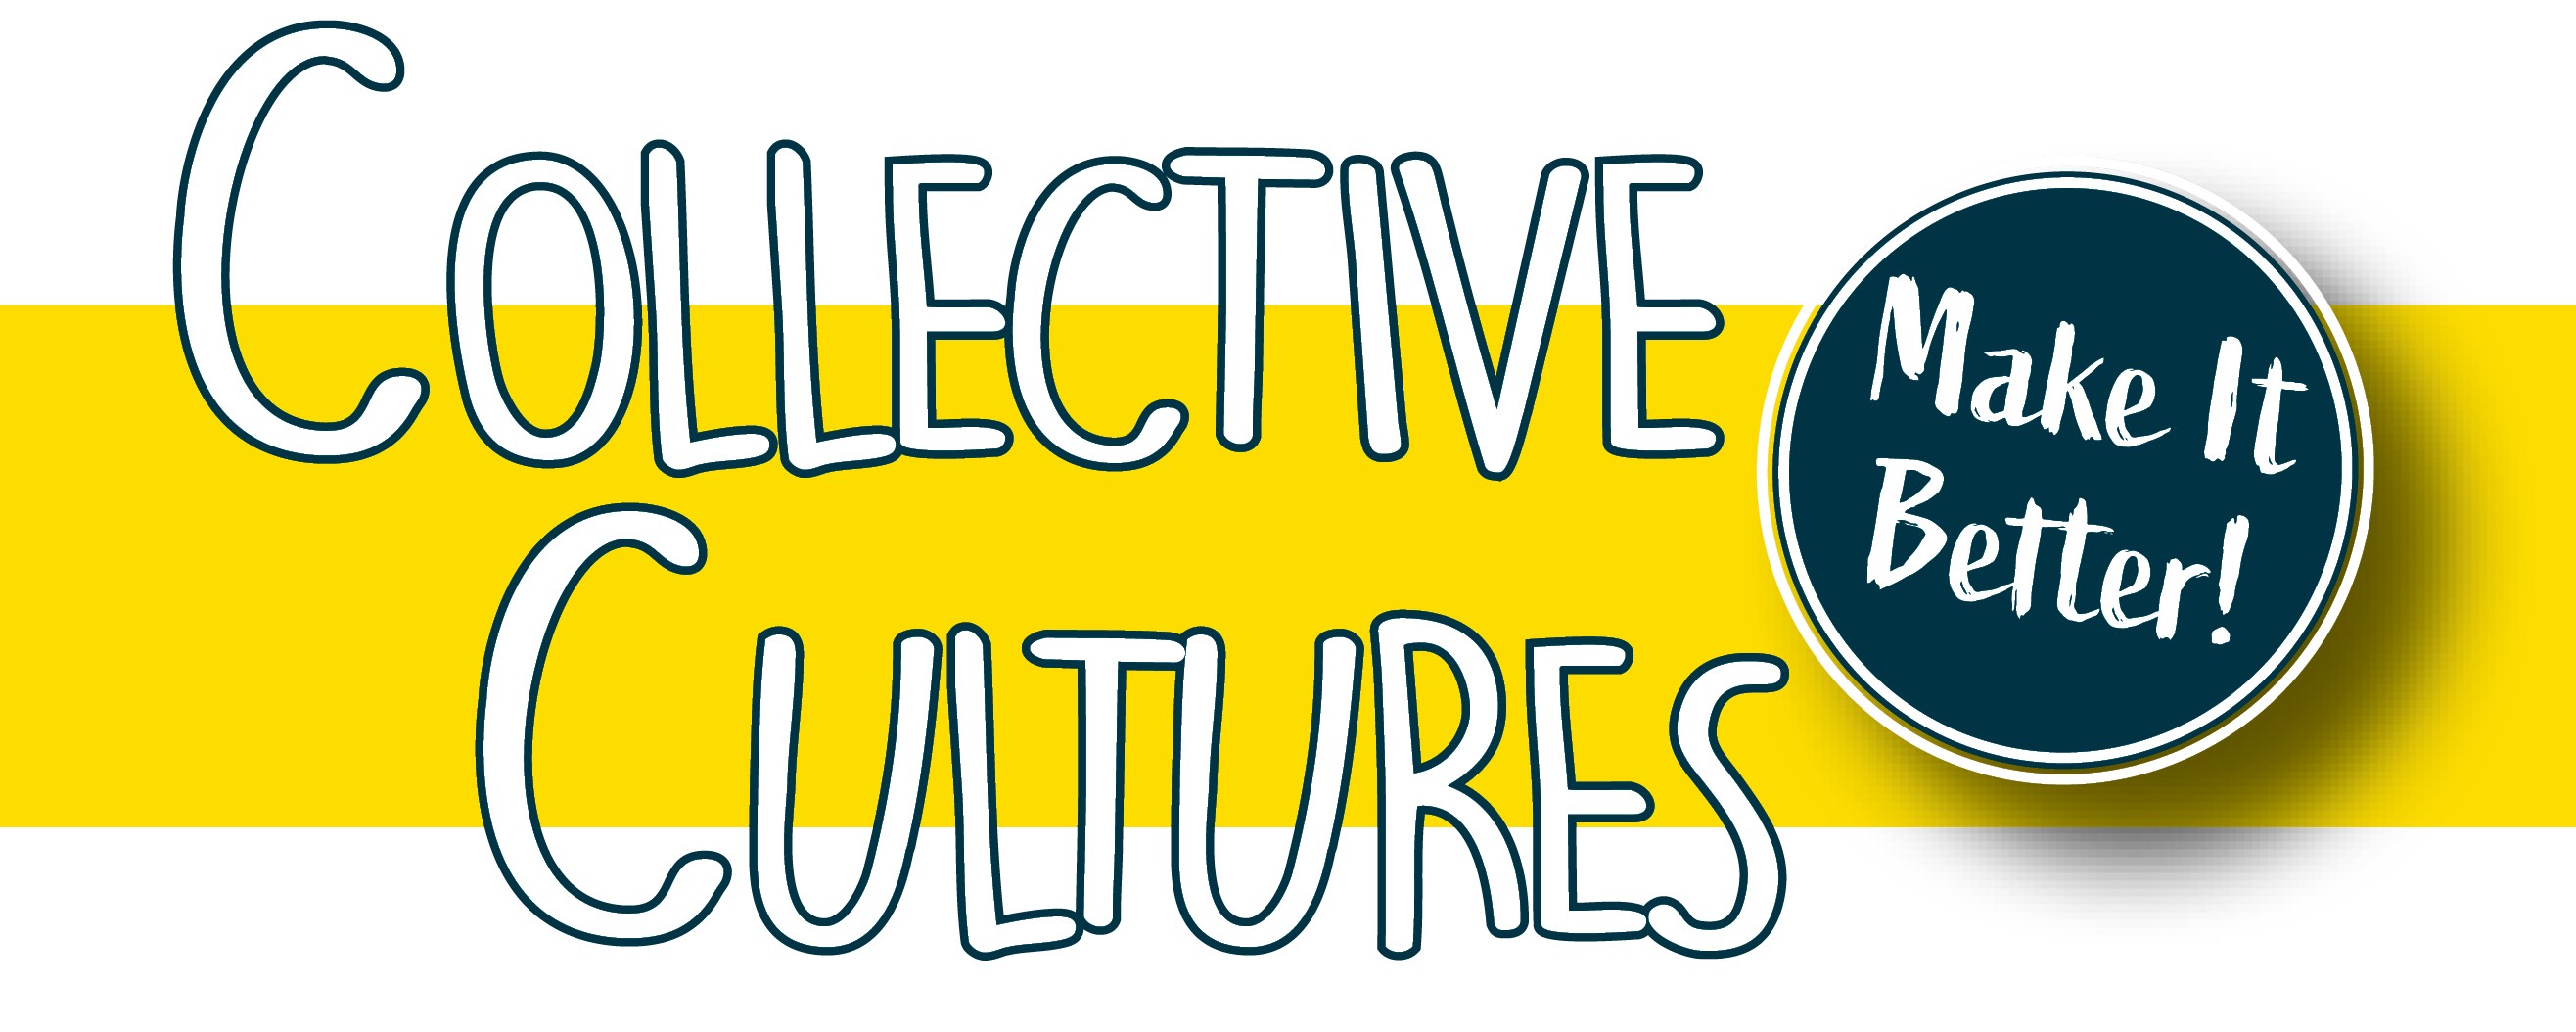 Collective Cultures